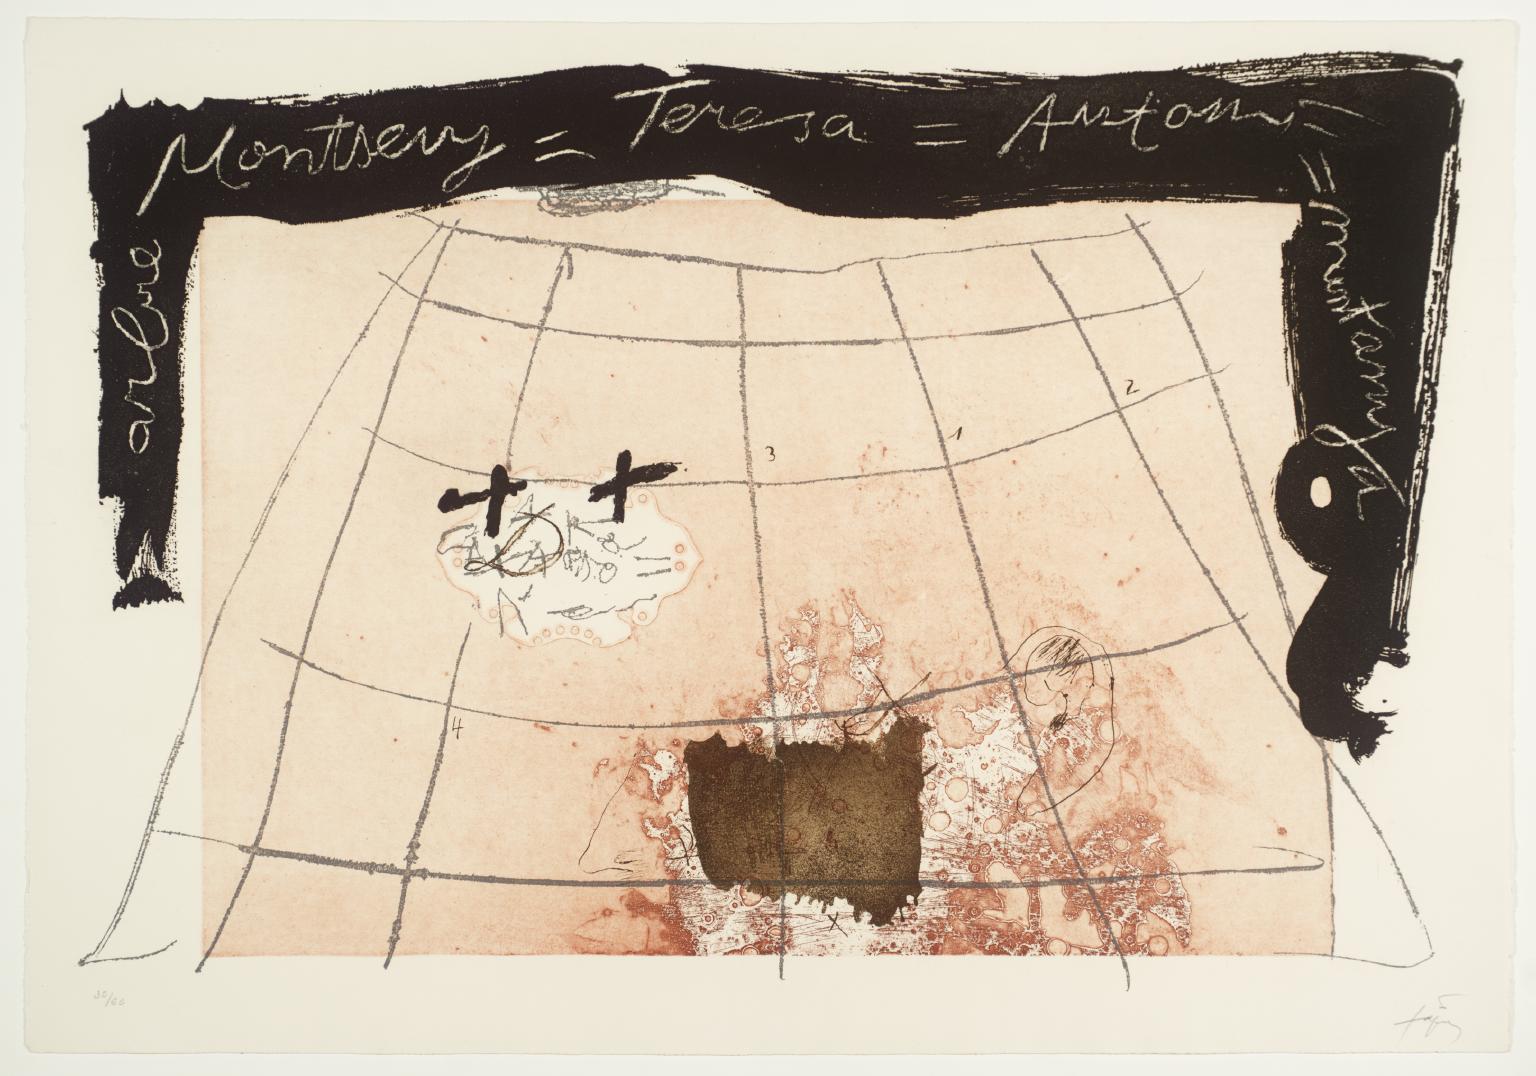 Cartography 1976 by Antoni Tapies 1923-2012